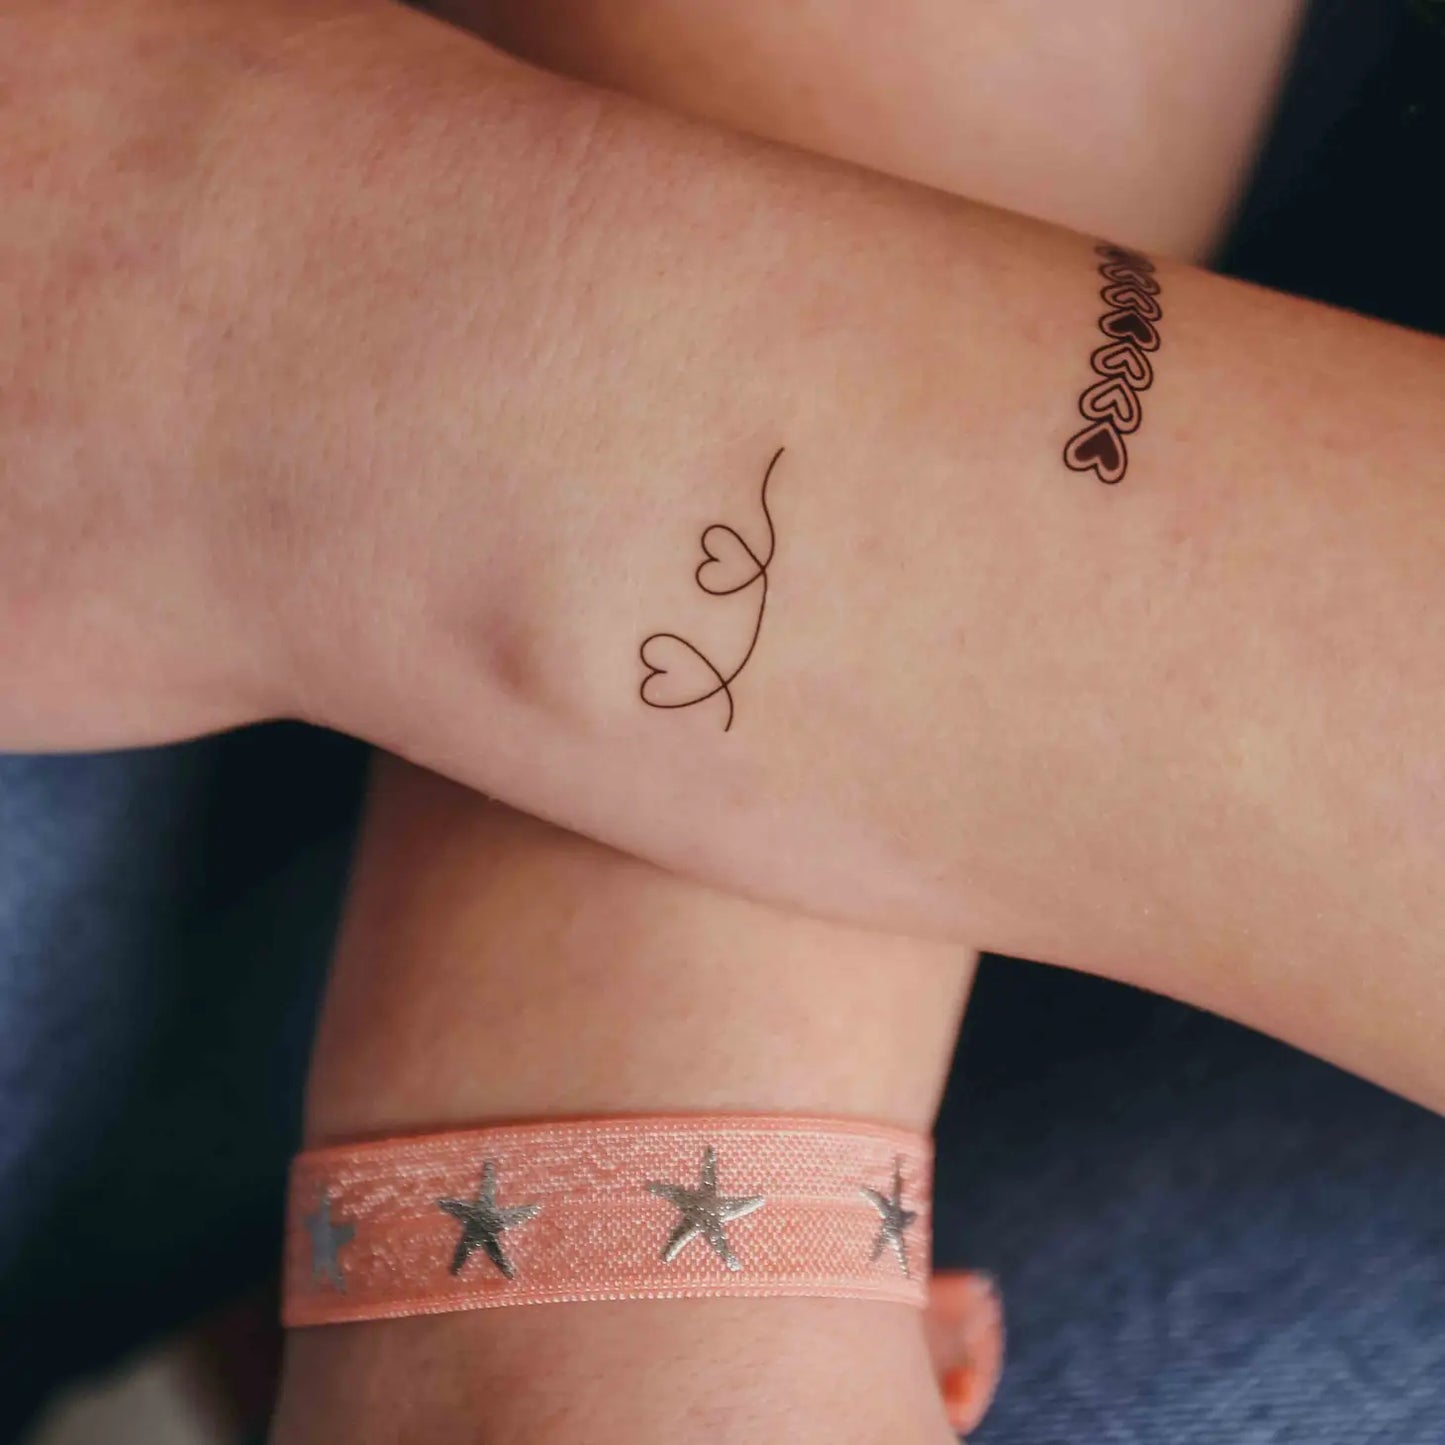 'You'Re the Bees Knees'!' Temporary Tattoos